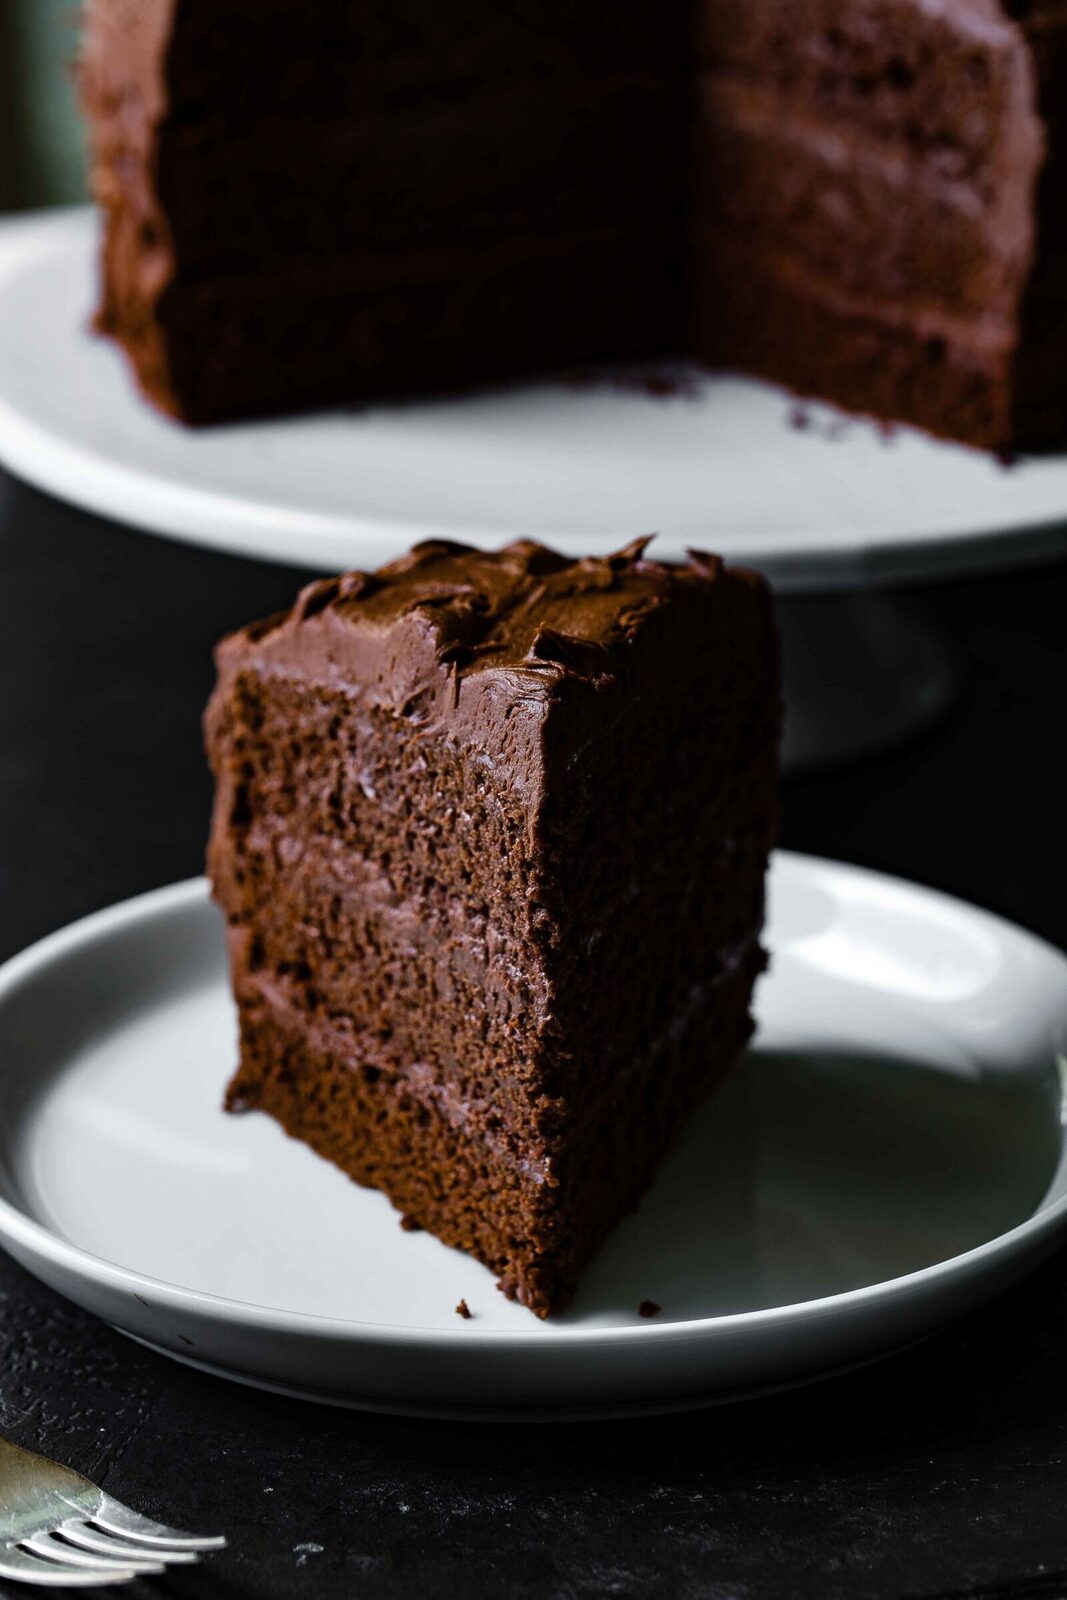 late-cake-with-chocolate-frosting-recipe-10-scaled.jpg